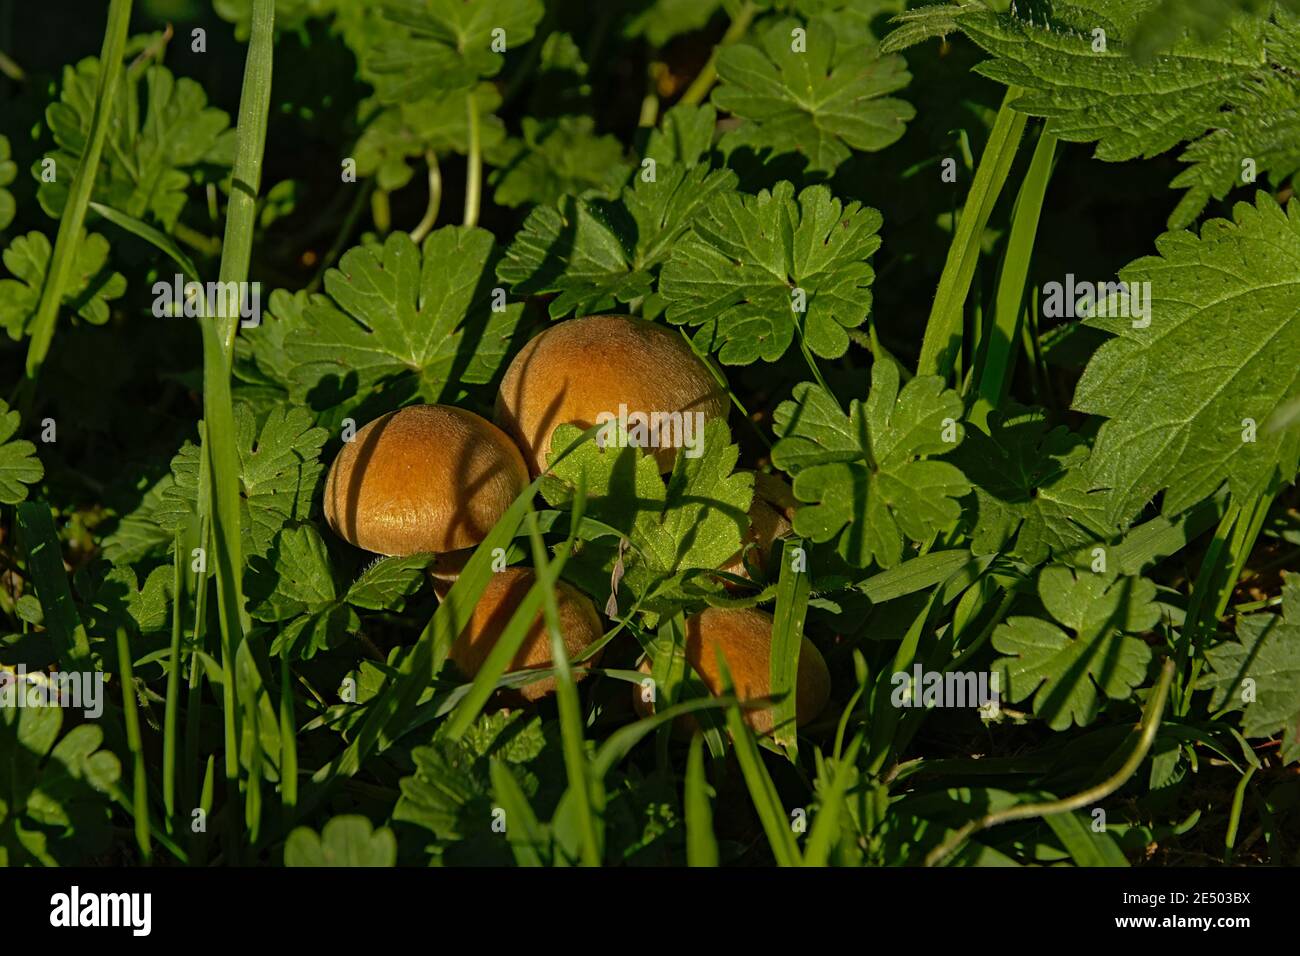 Bolete mushroom in between green leafs and grass on the forest floor Stock Photo